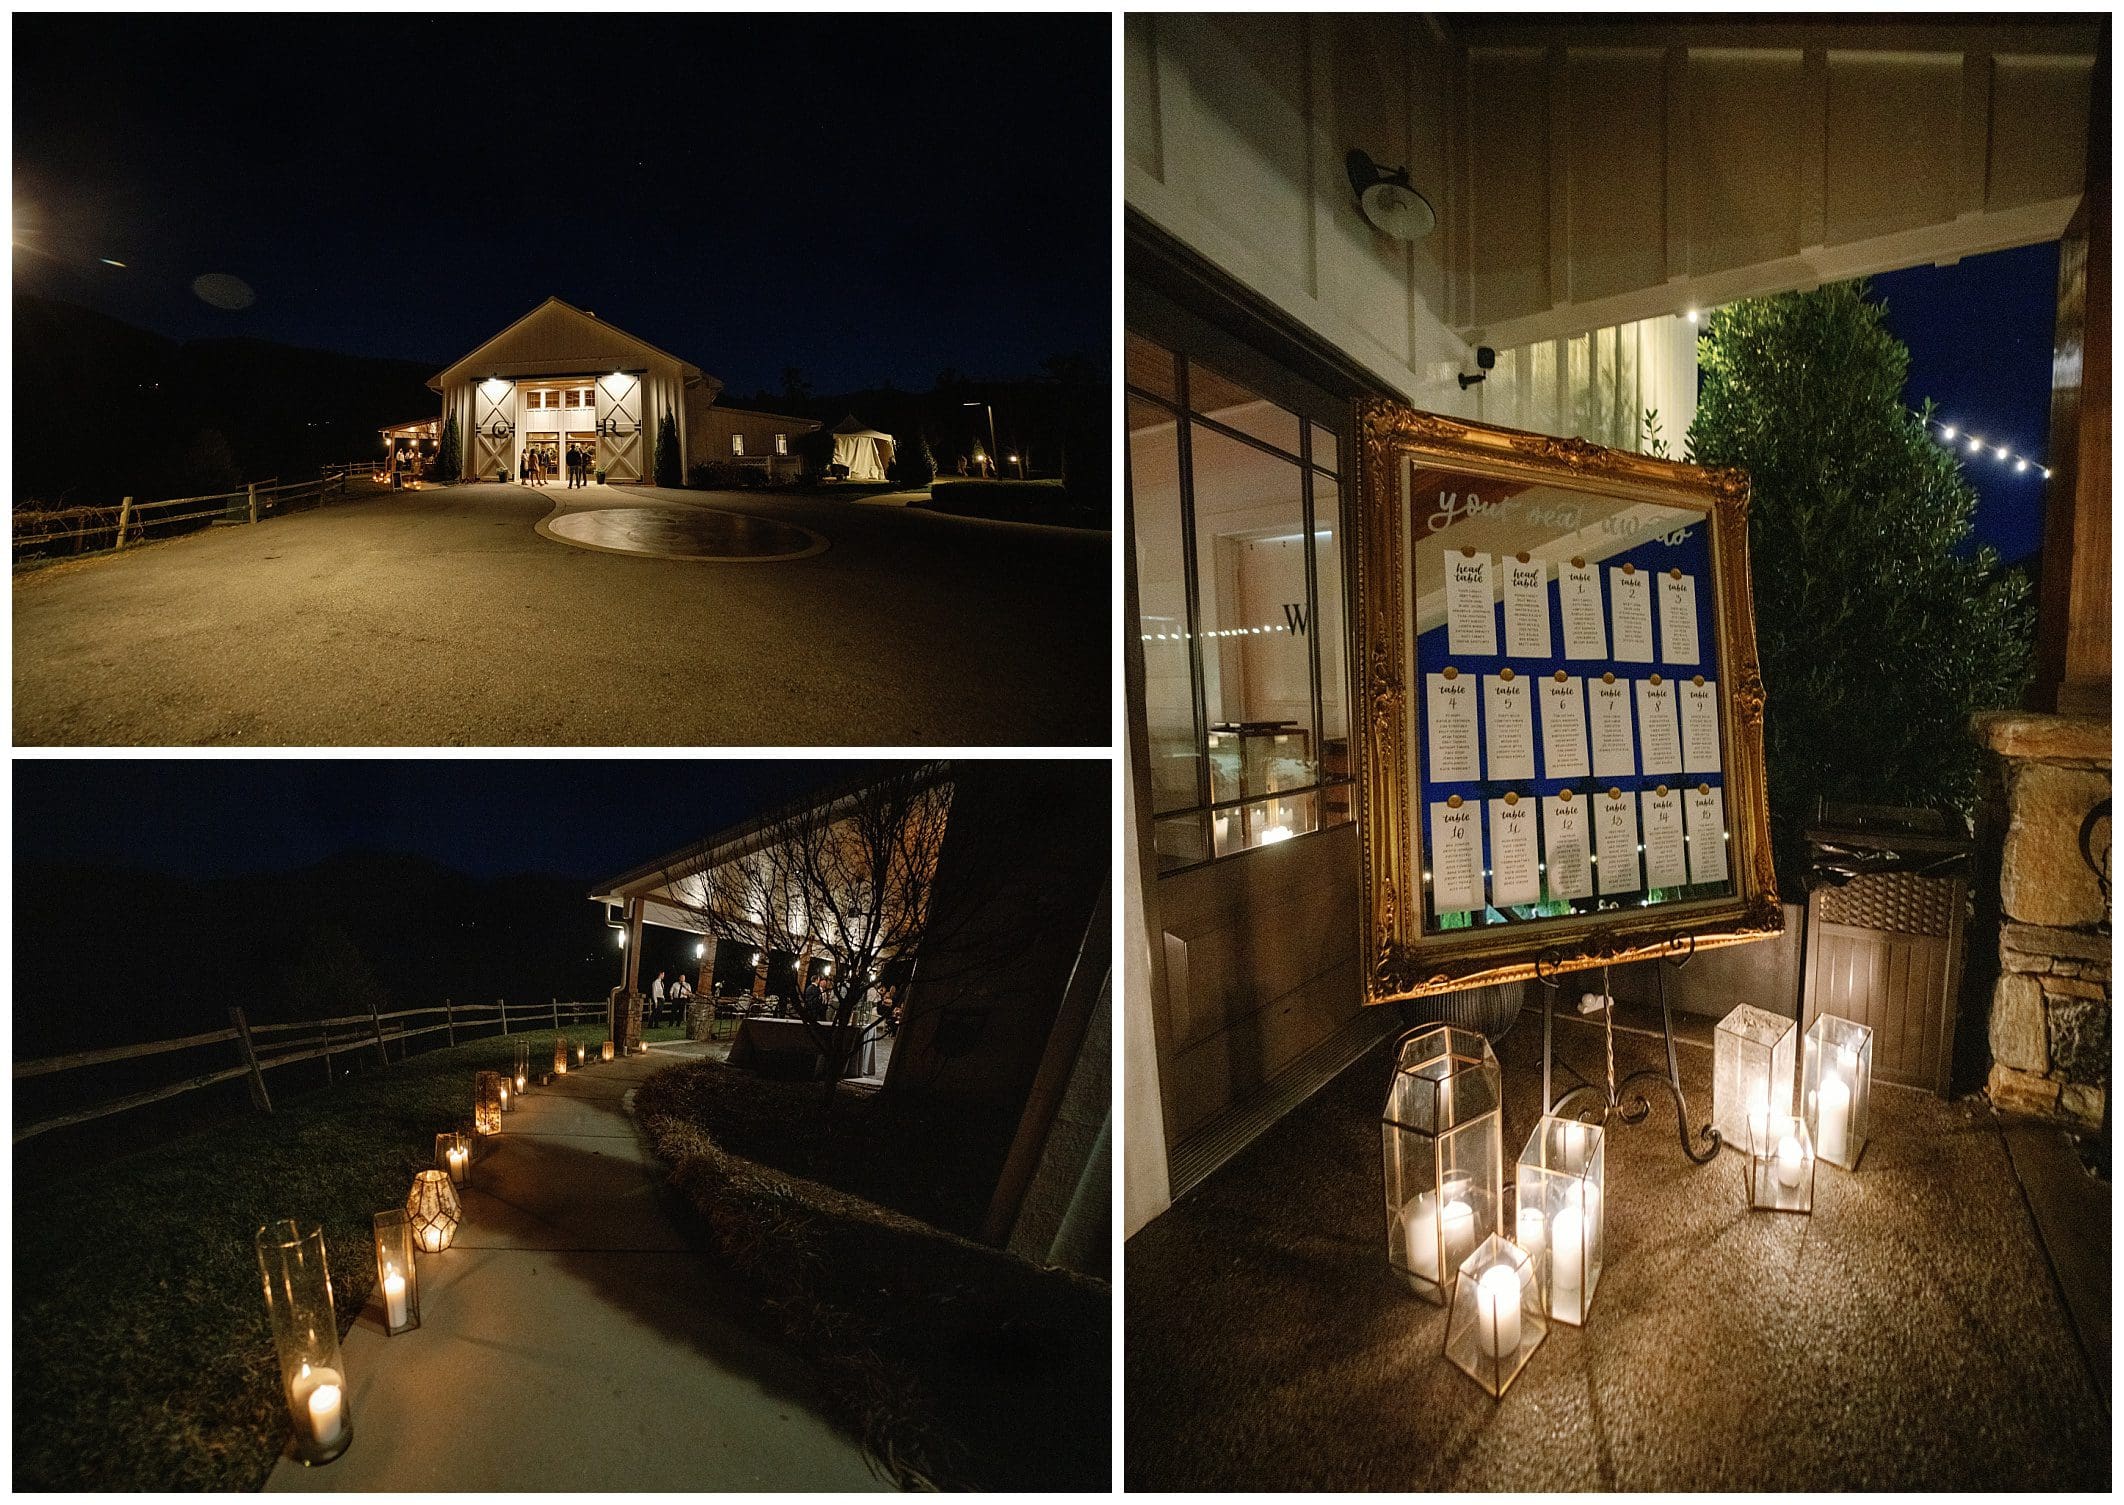 A wedding reception at night with candles at the entrance.